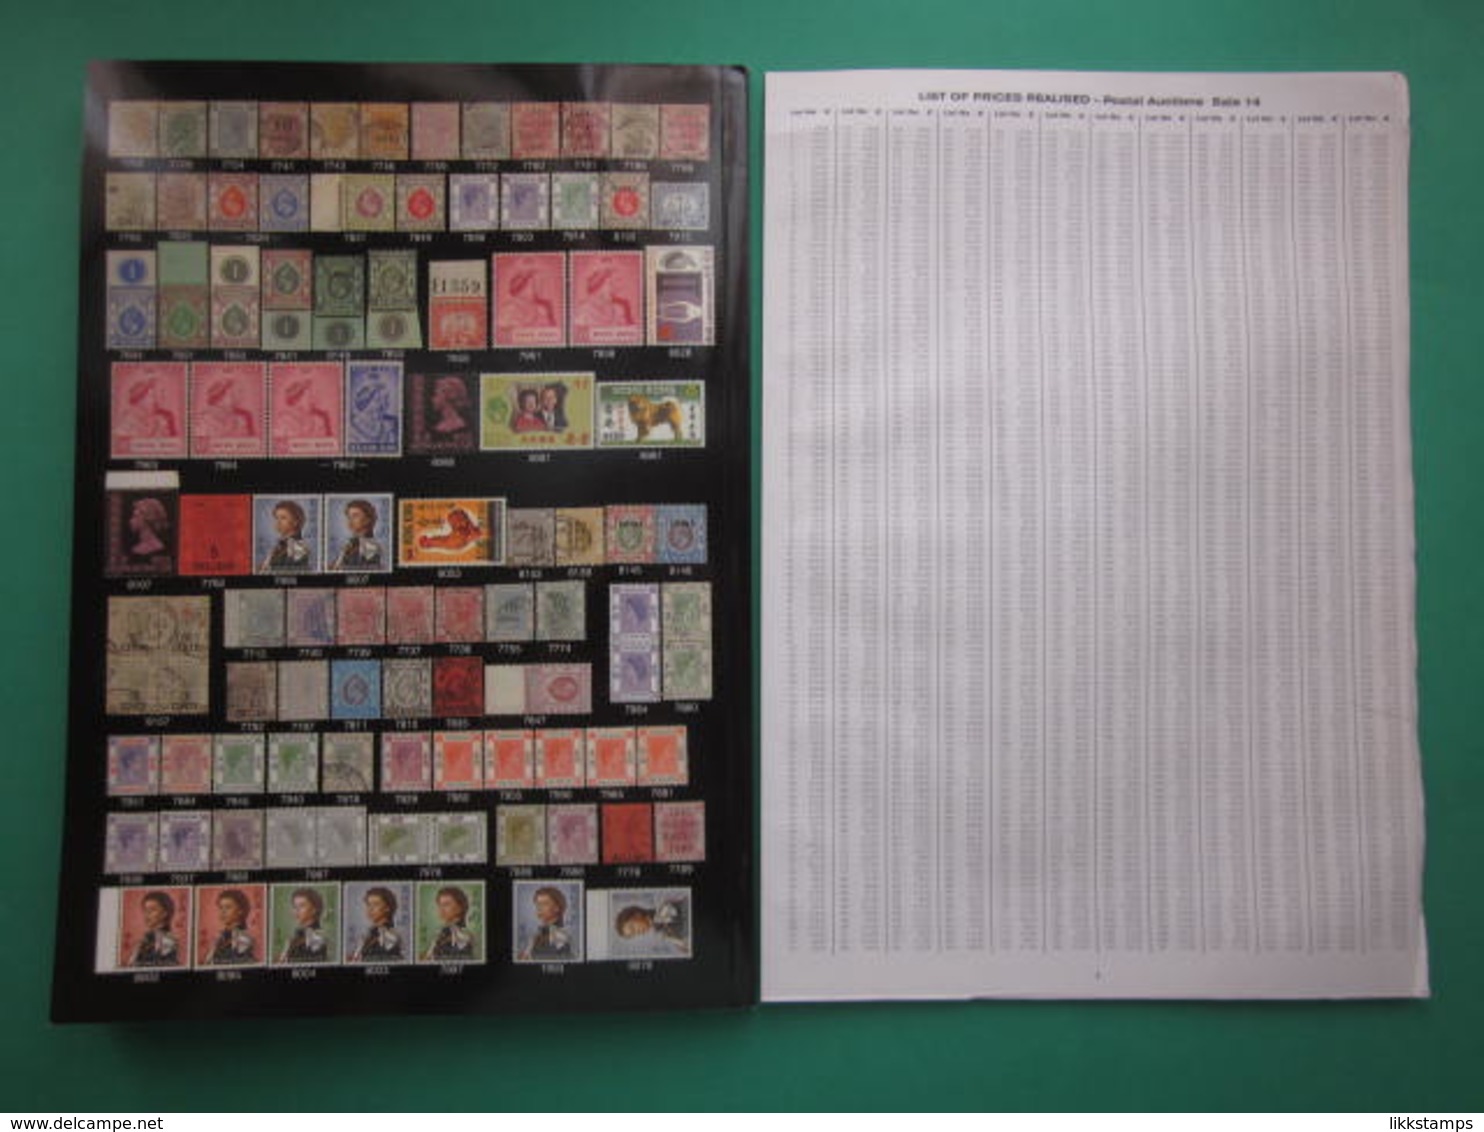 UNIVERSAL PHILATELIC AUCTIONS CATALOGUE FOR SALE No.14 On TUESDAY 6th JULY 2004 #L0170 - Cataloghi Di Case D'aste